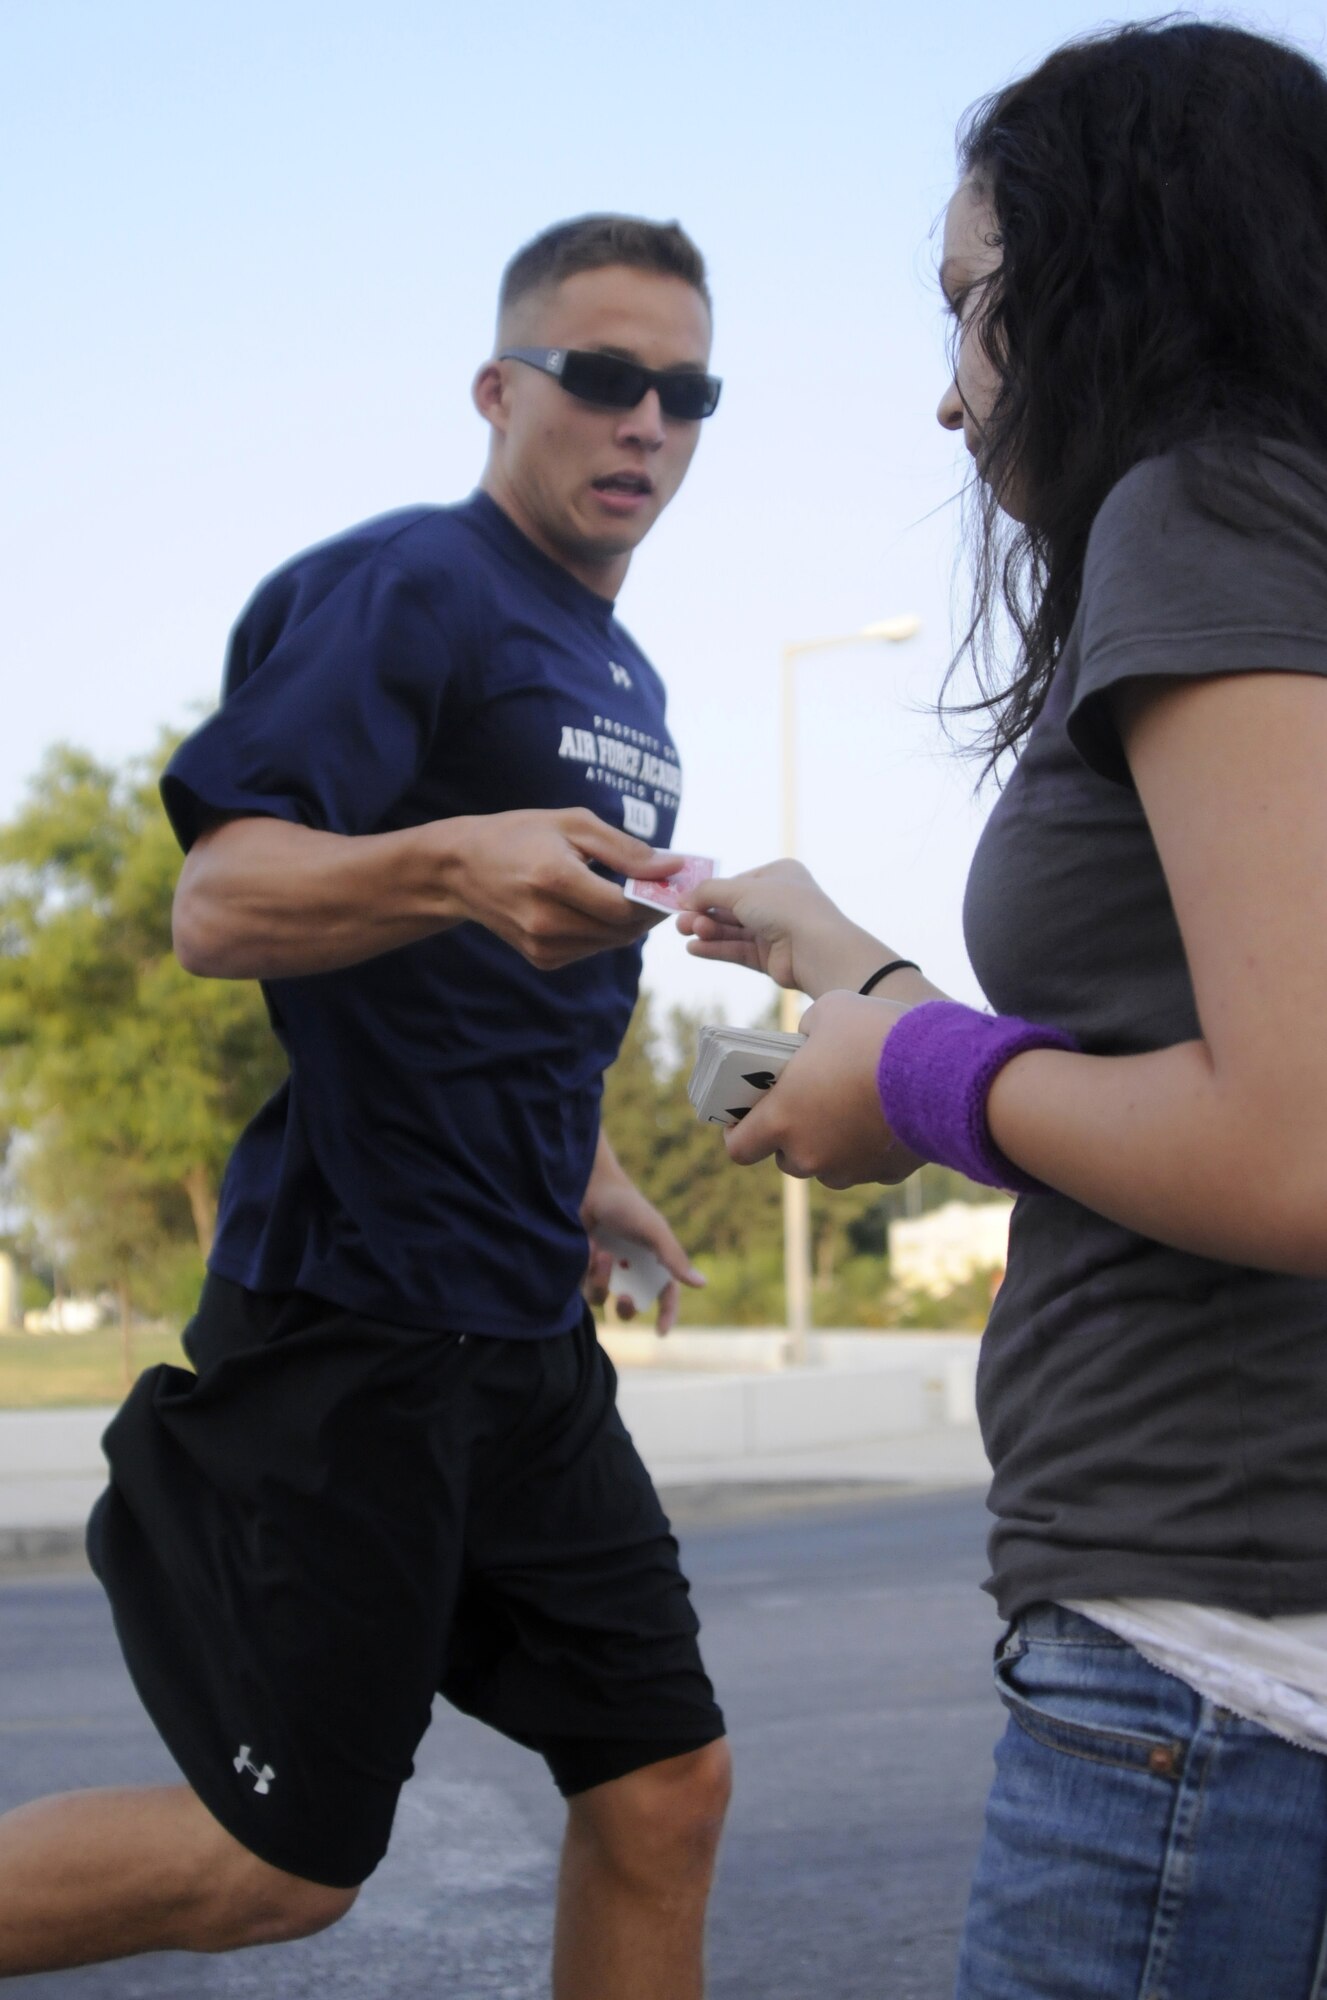 Volunteer Kayleigh Pears, daughter of Col. Andrew Pears, the 39th Mission Support Group commander, hands off a poker card to Airman 1st Class Danny Hagglund, 728th Air Mobilty Squadron, at Incirlik Air Base, Turkey, during the 5k Poker Run Saturday, Aug. 8, 2009. Participants picked up a single card from five points throughout the run, aiming for the best “poker hand” to win a prize. (U.S. Air Force photo/Airman 1st Class Amber Ashcraft)